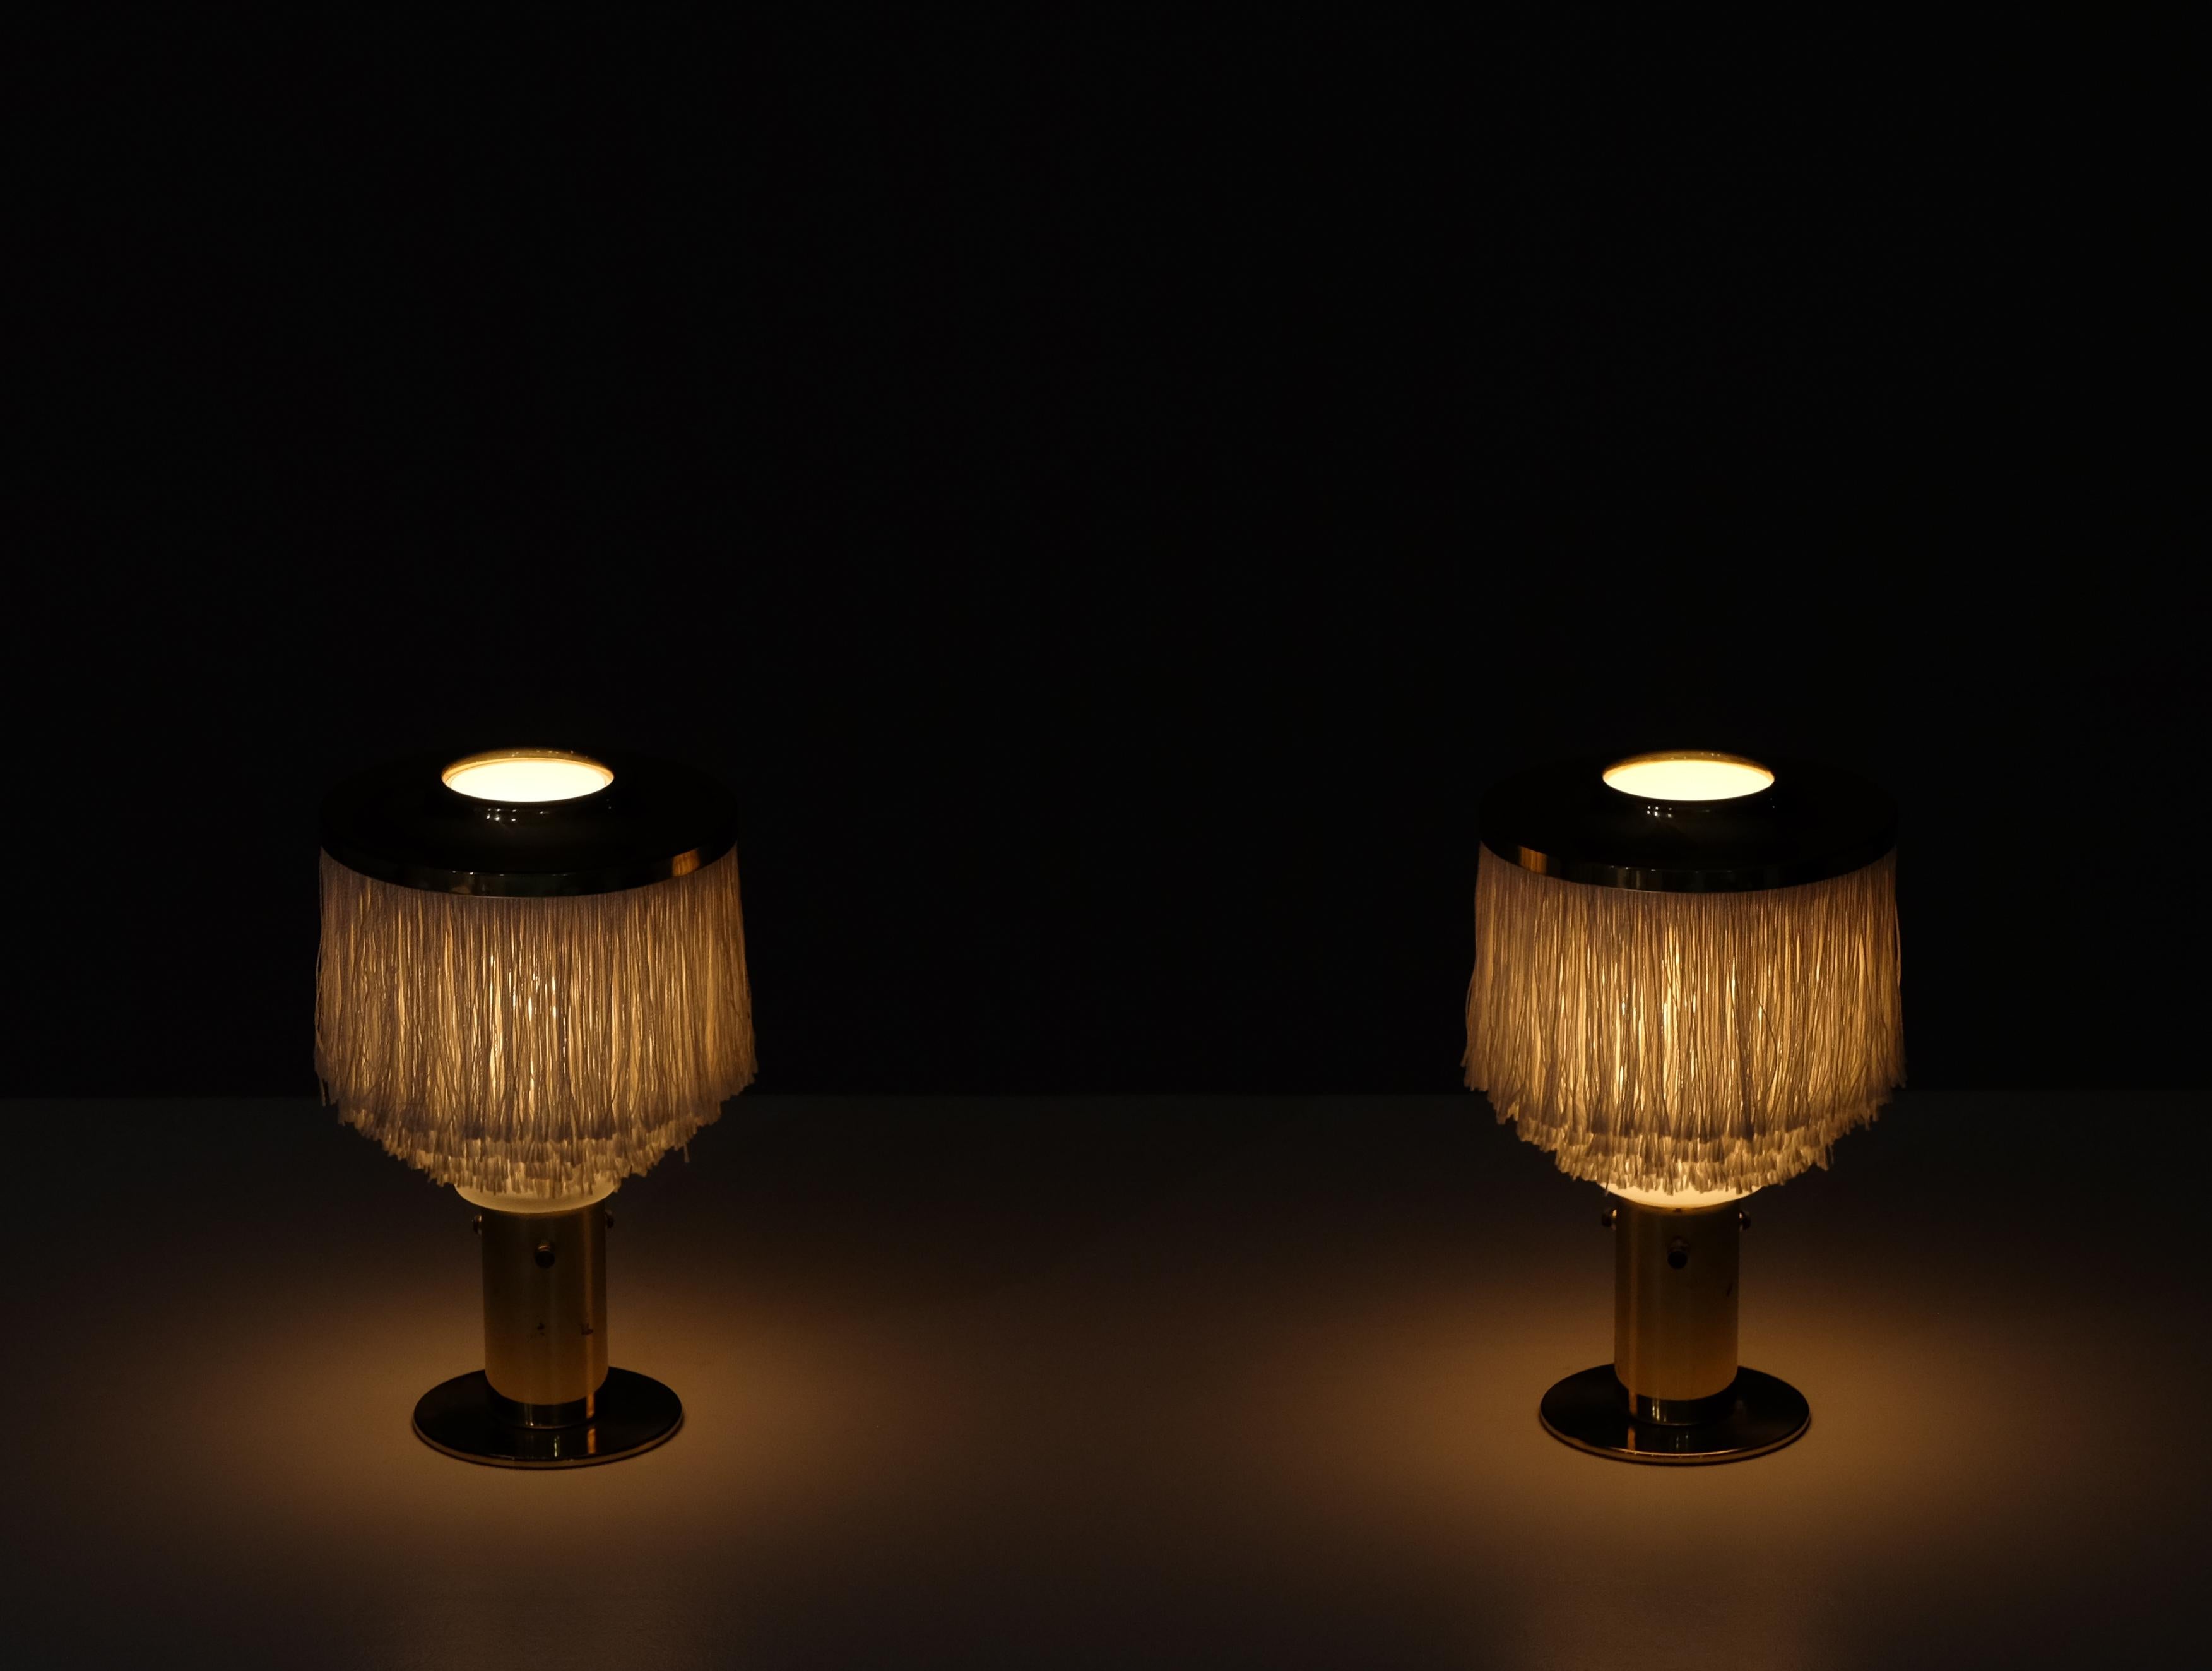 Ivory white fringes, brass and opaline glass shades. Produced by Hans-Agne Jakobsson, Markaryd, 1960s.